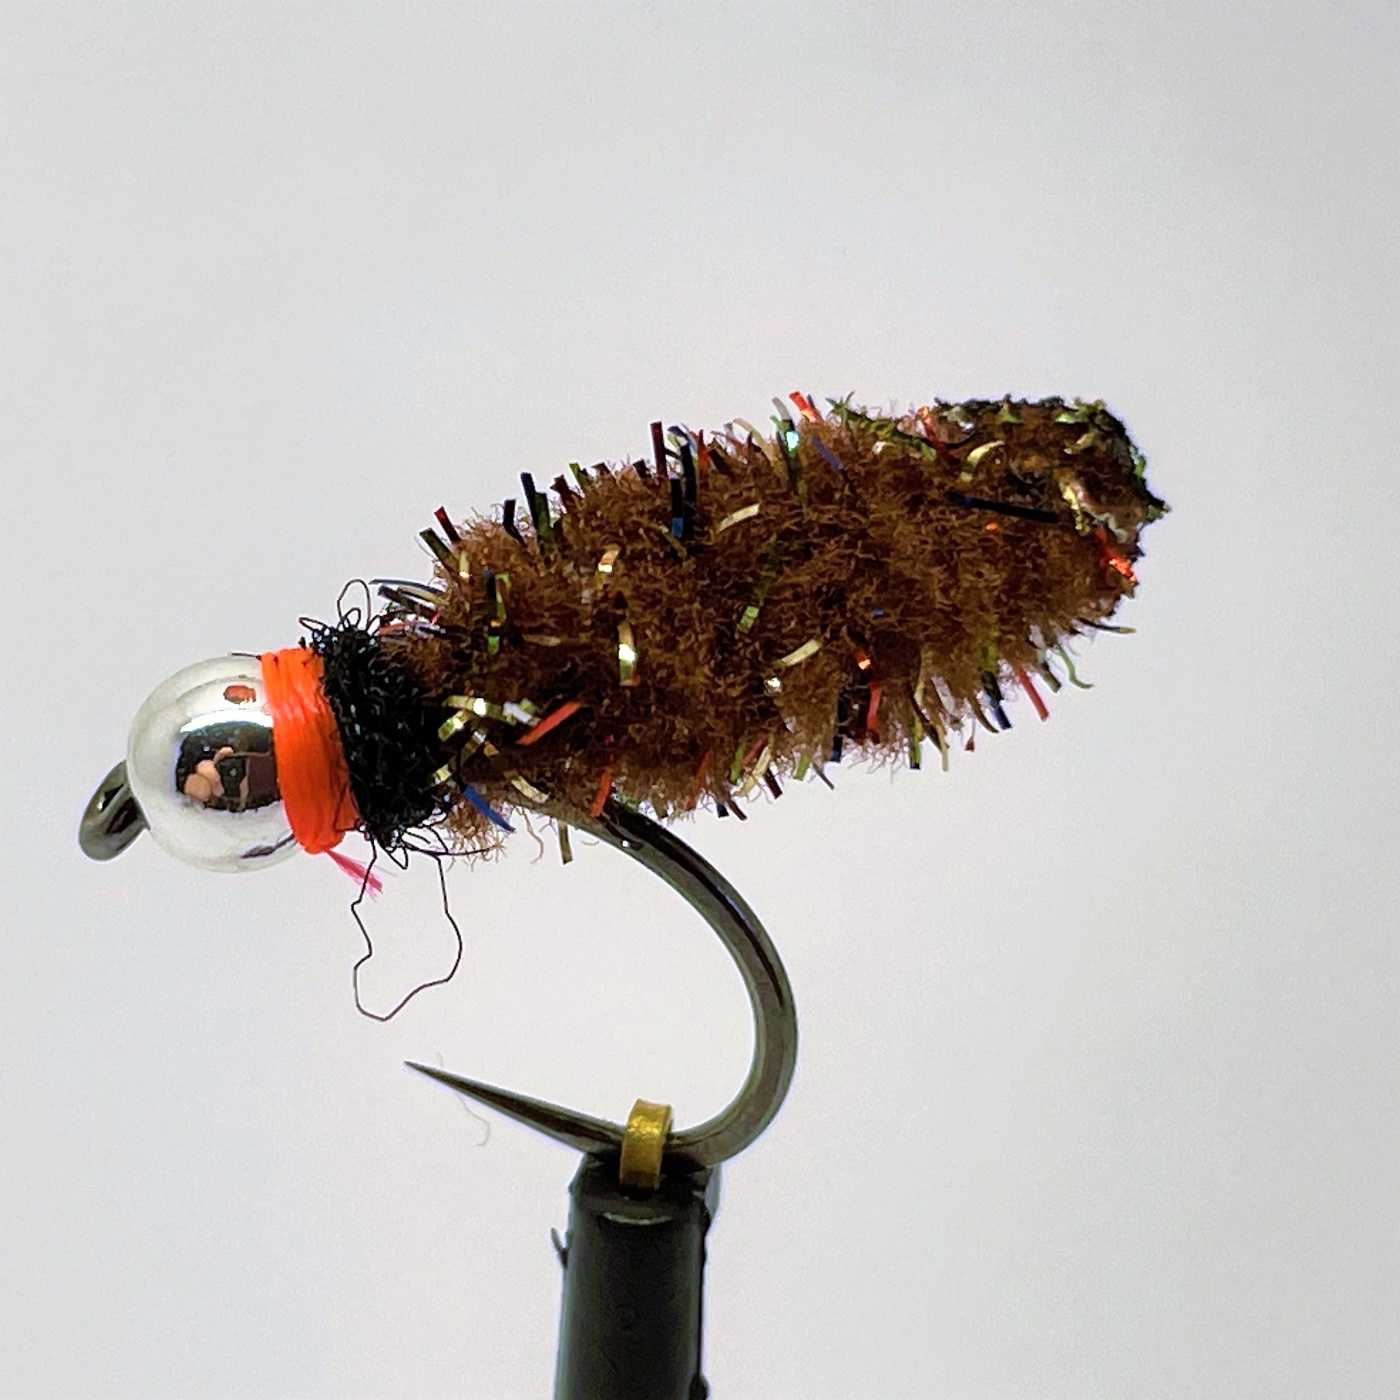 Phillippa Hake Flies Mopster Fly Silver bead Rootbeer